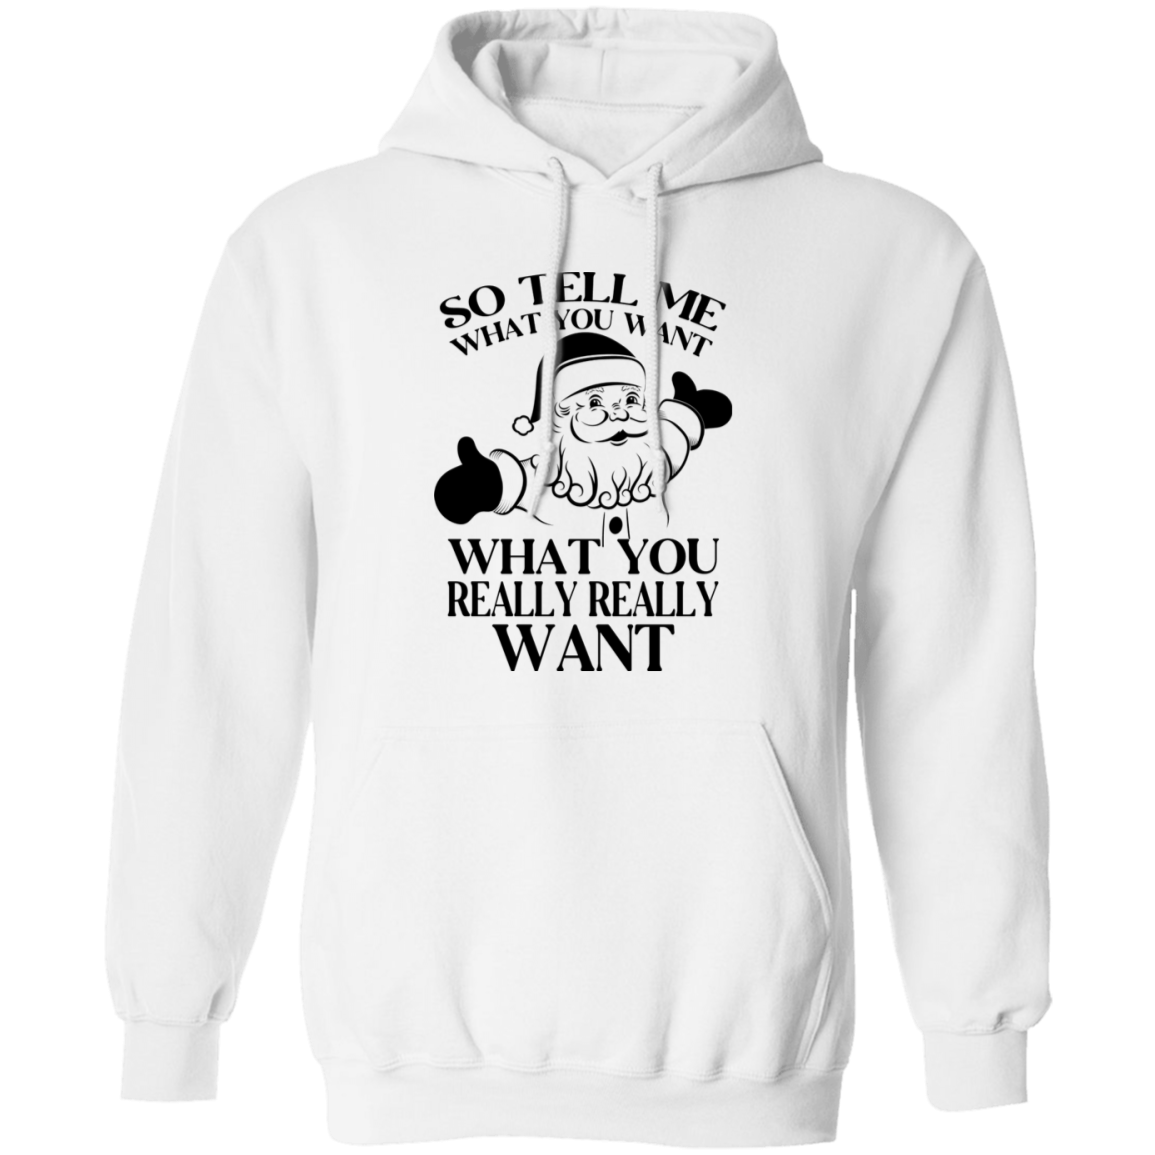 What You Really Really Want G185 Pullover Hoodie